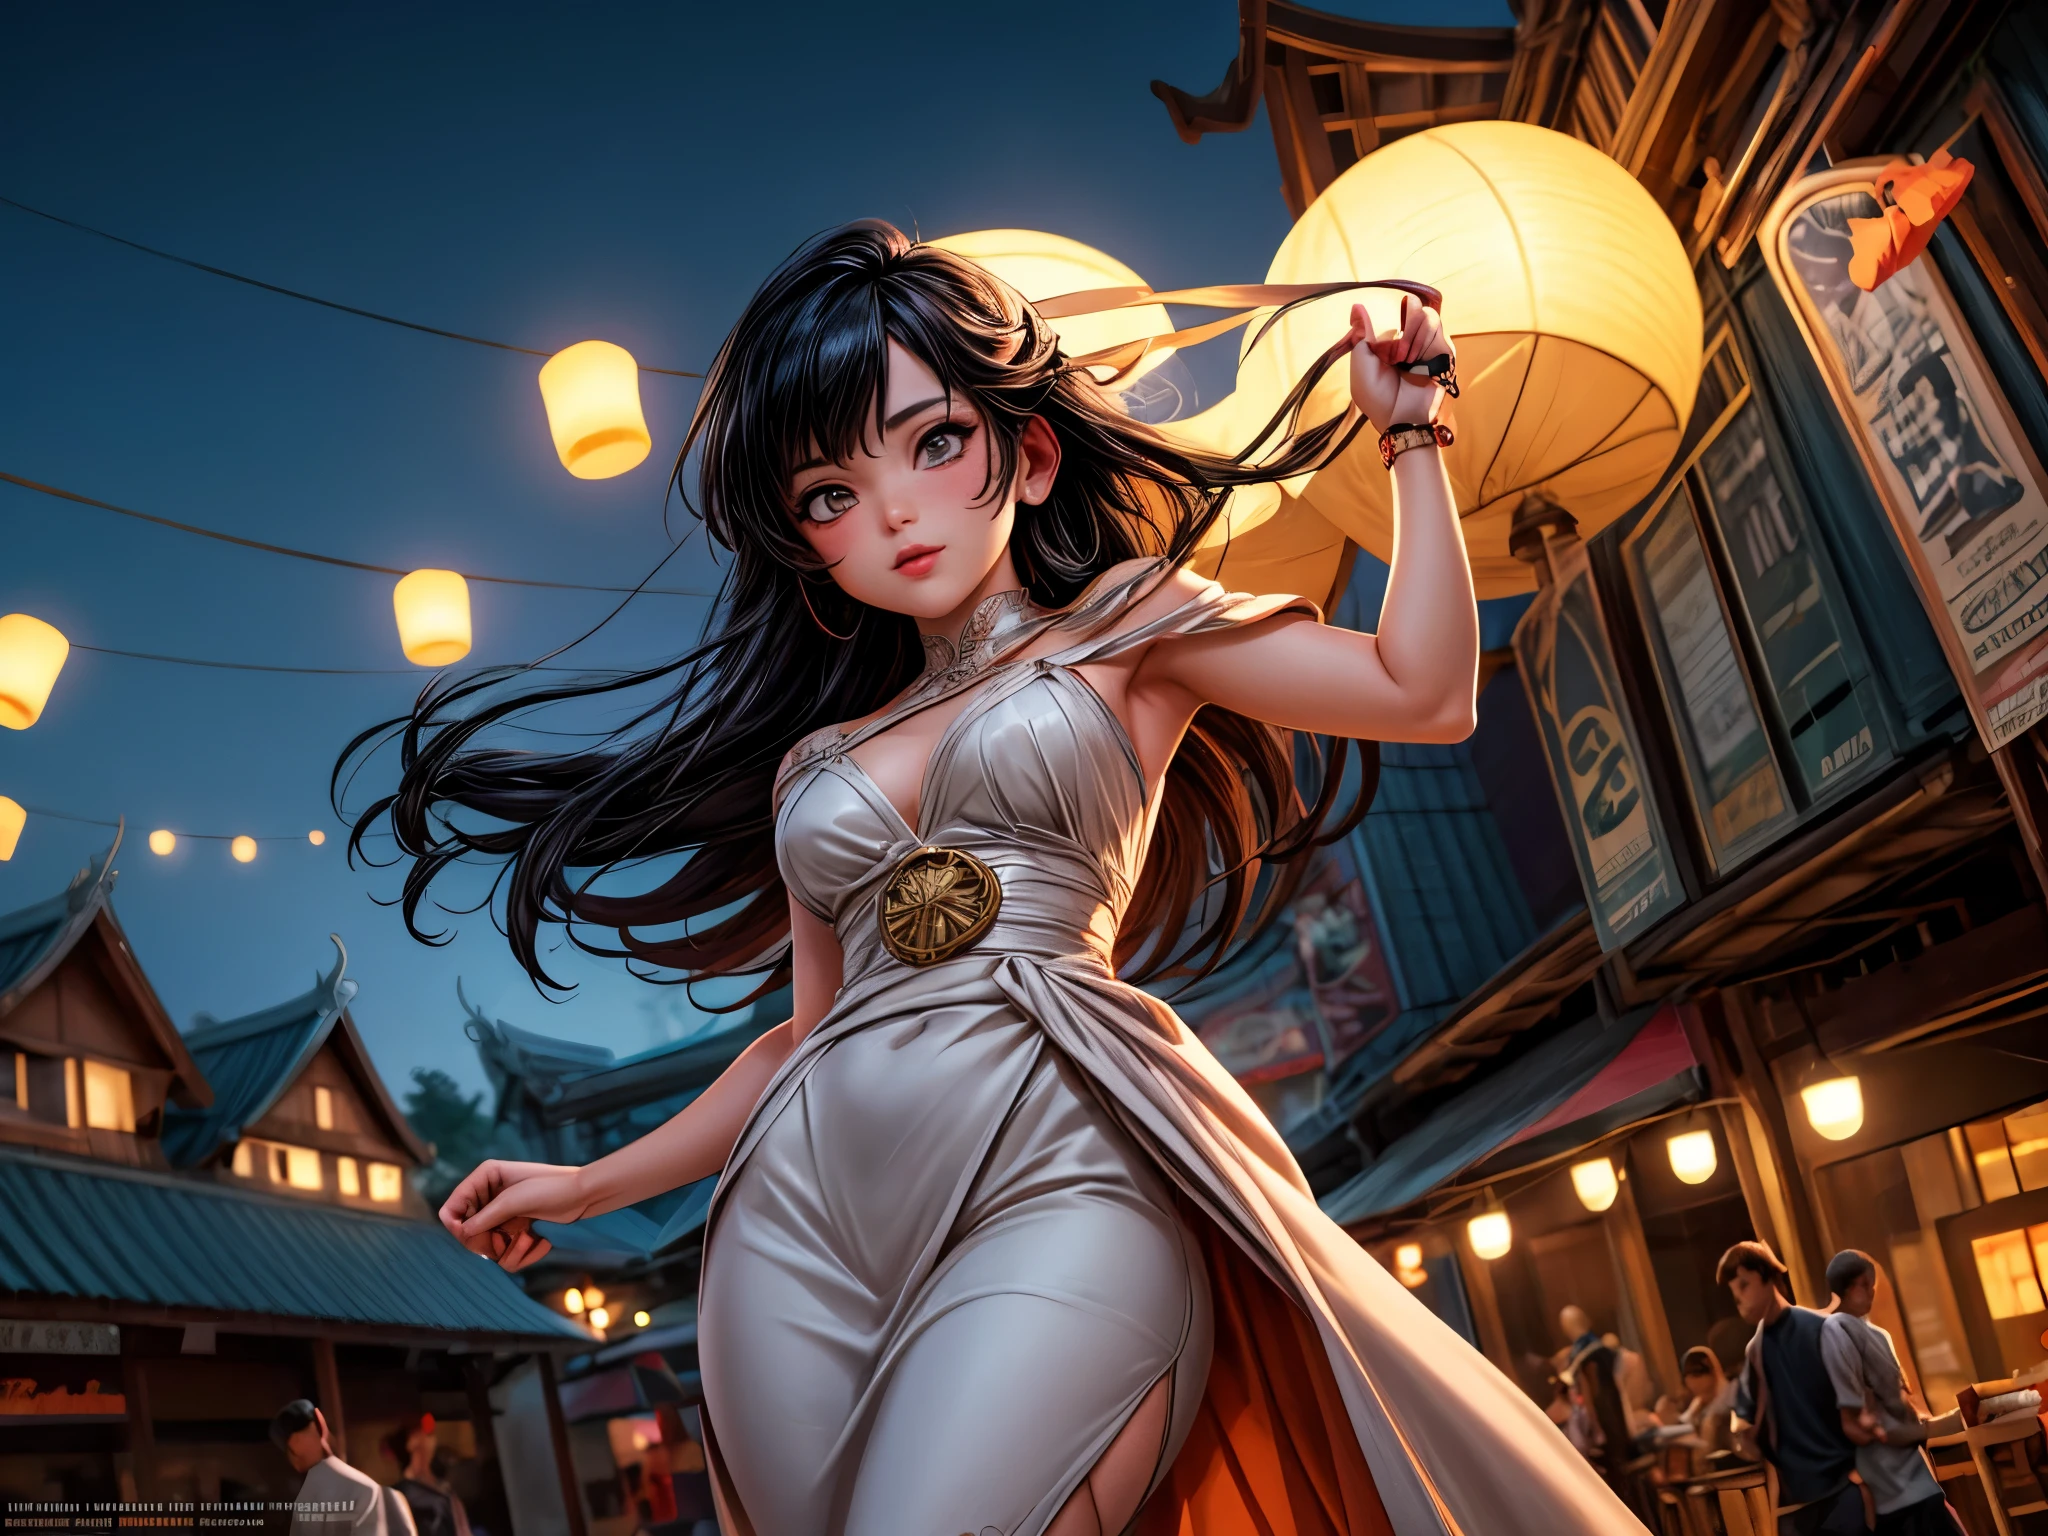 Anime - Naked, Nude portrait of a black-haired woman, Arrogant demeanor, Magnificent and majestic, Steam Punk City on Background, Detailed digital anime art, Gouache style art, artgerm artgerm and wlop, Argerm style, High quality 8k detailed artwork. , There is a Cyber Punk skyscraper in the background., Aurora, Crescent moon, Many shooting stars in the sky, Loy Krathong Festival,Chiang Mai , Lanna style, night time, full moon, Many floating lanterns in the sky, Thai architecture 2D , faded picture ,vintage color, lined, Very high quality work , Very high detail , There are many types combined.... , Animation, 4k, attitude, vintage style , Thailand